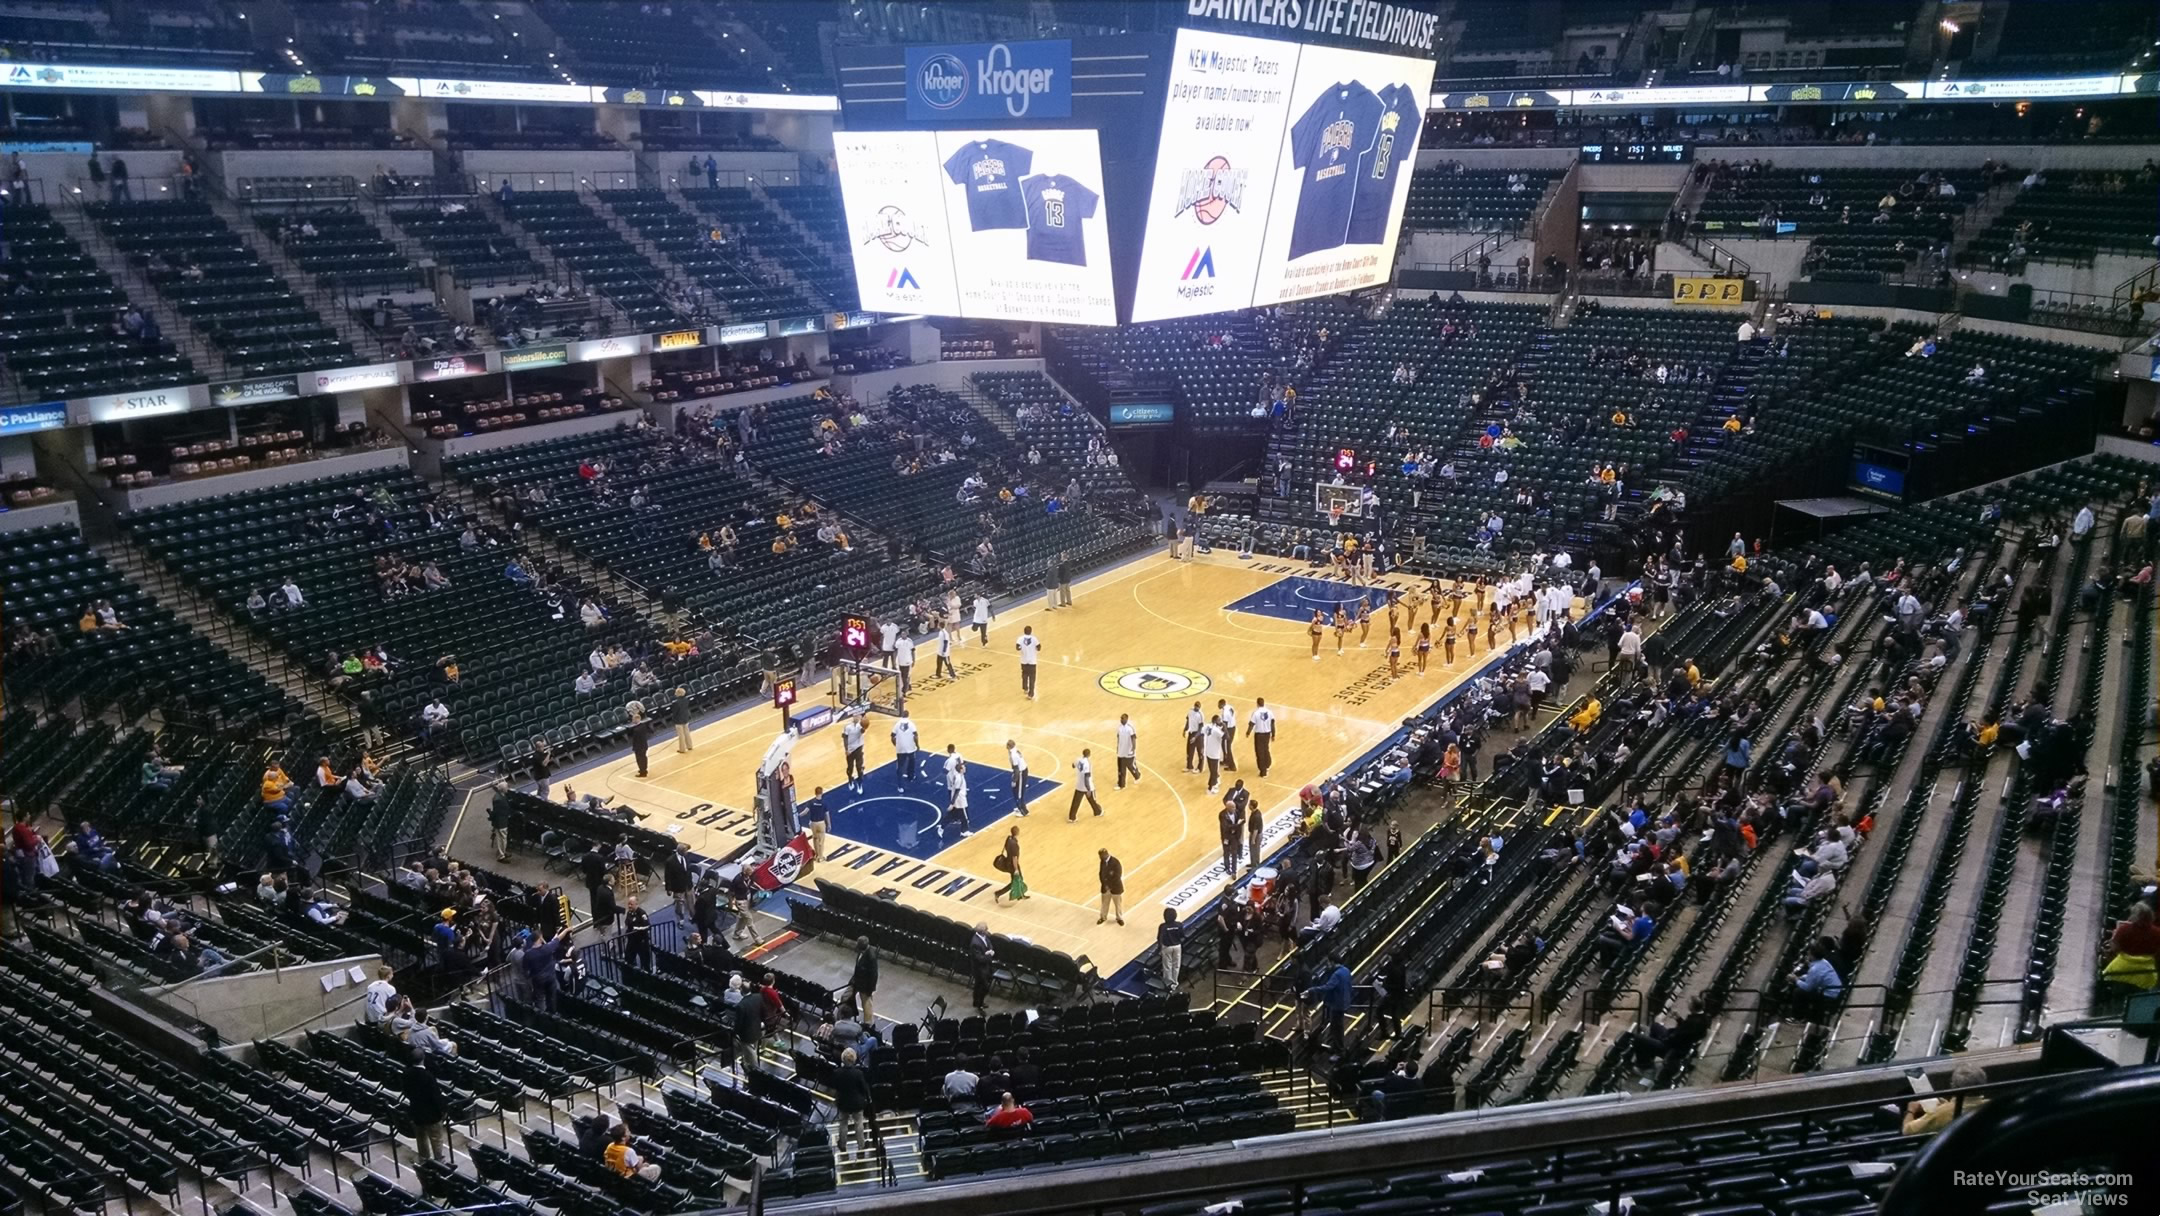 Bankers Life Seating Chart View Two Birds Home